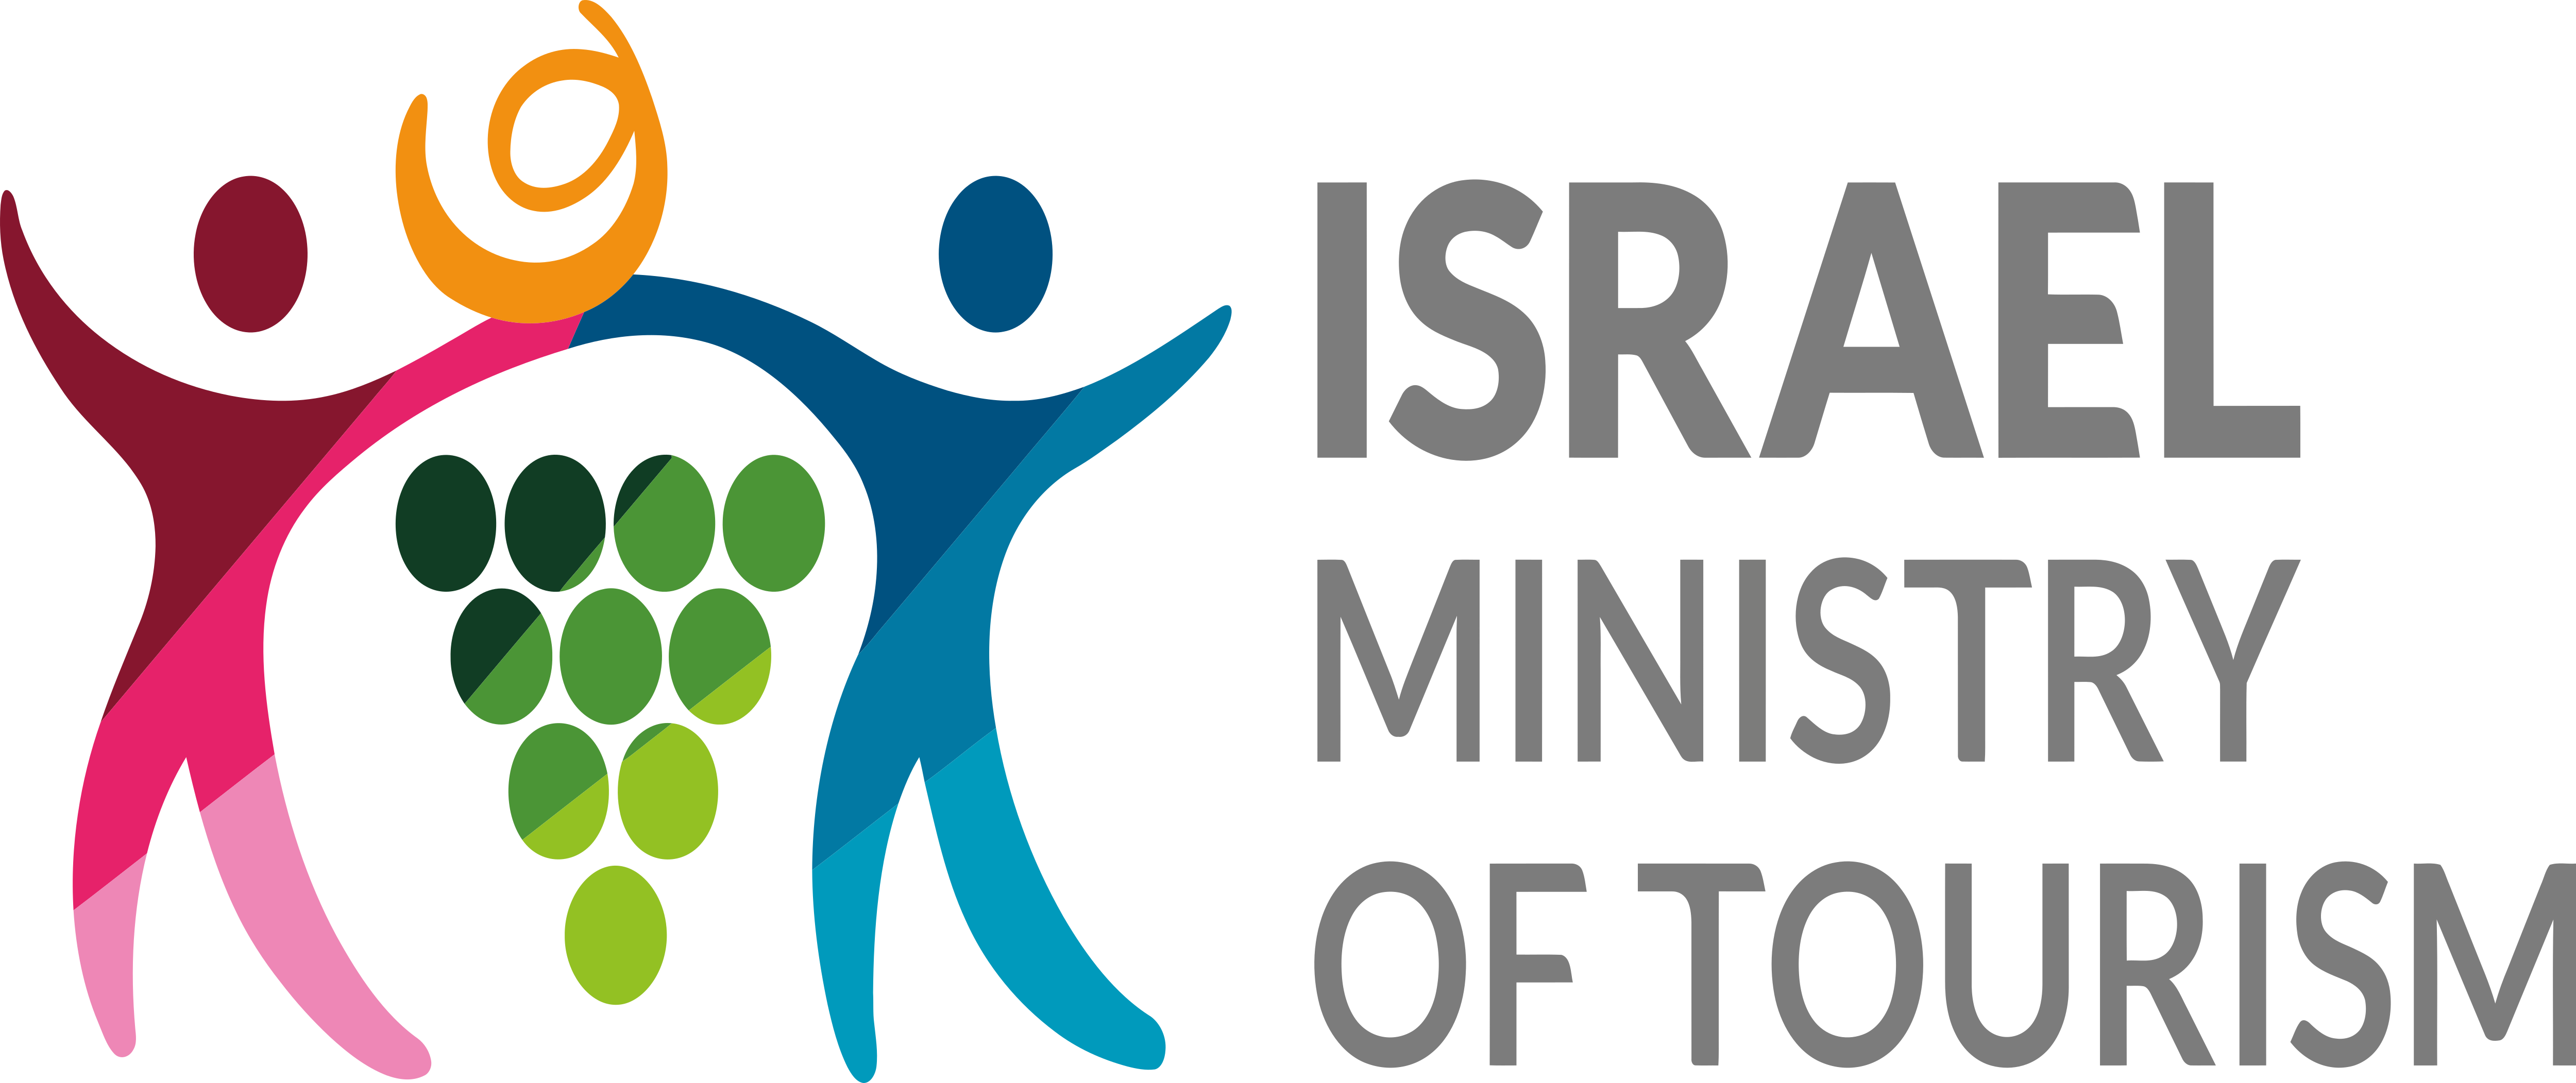 Israel_Ministry_of_Tourism_Logo-1-1-1.png